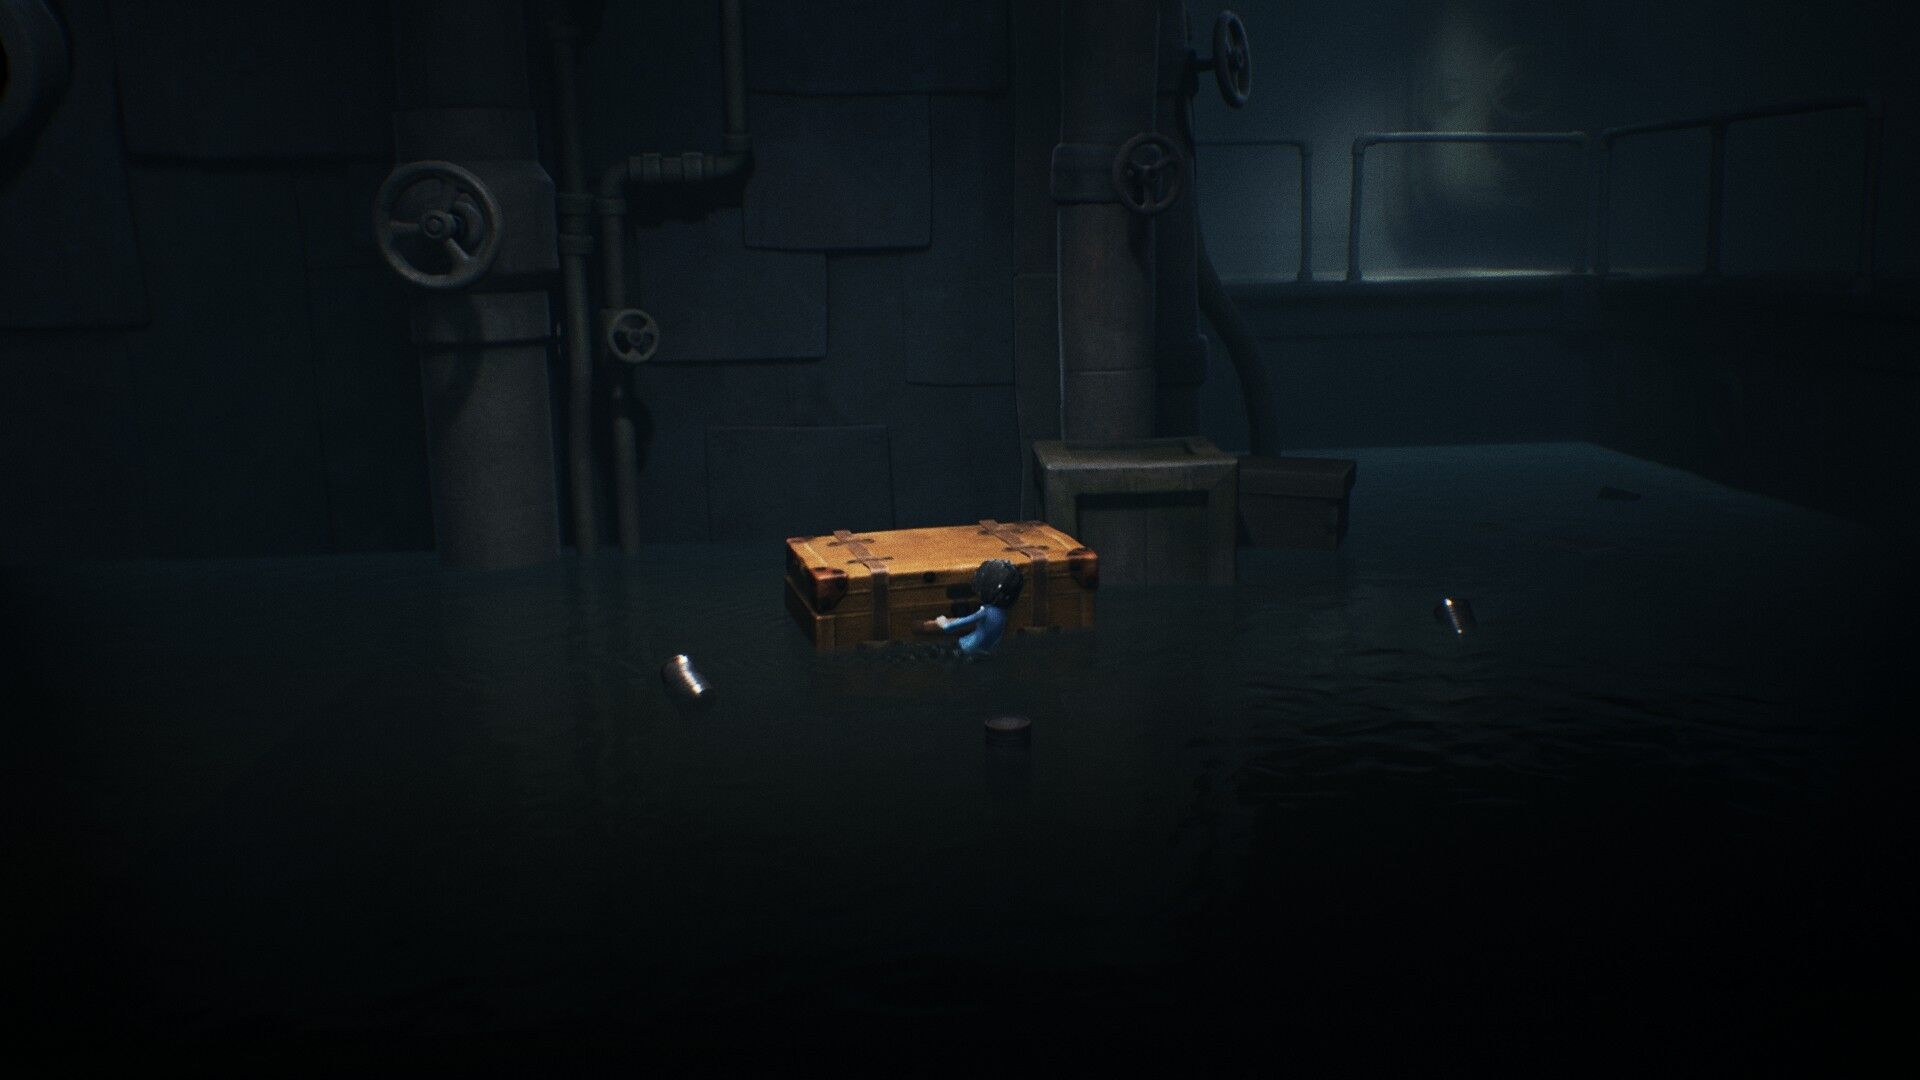 Little Nightmares 'The Depths' DLC is Out Tomorrow